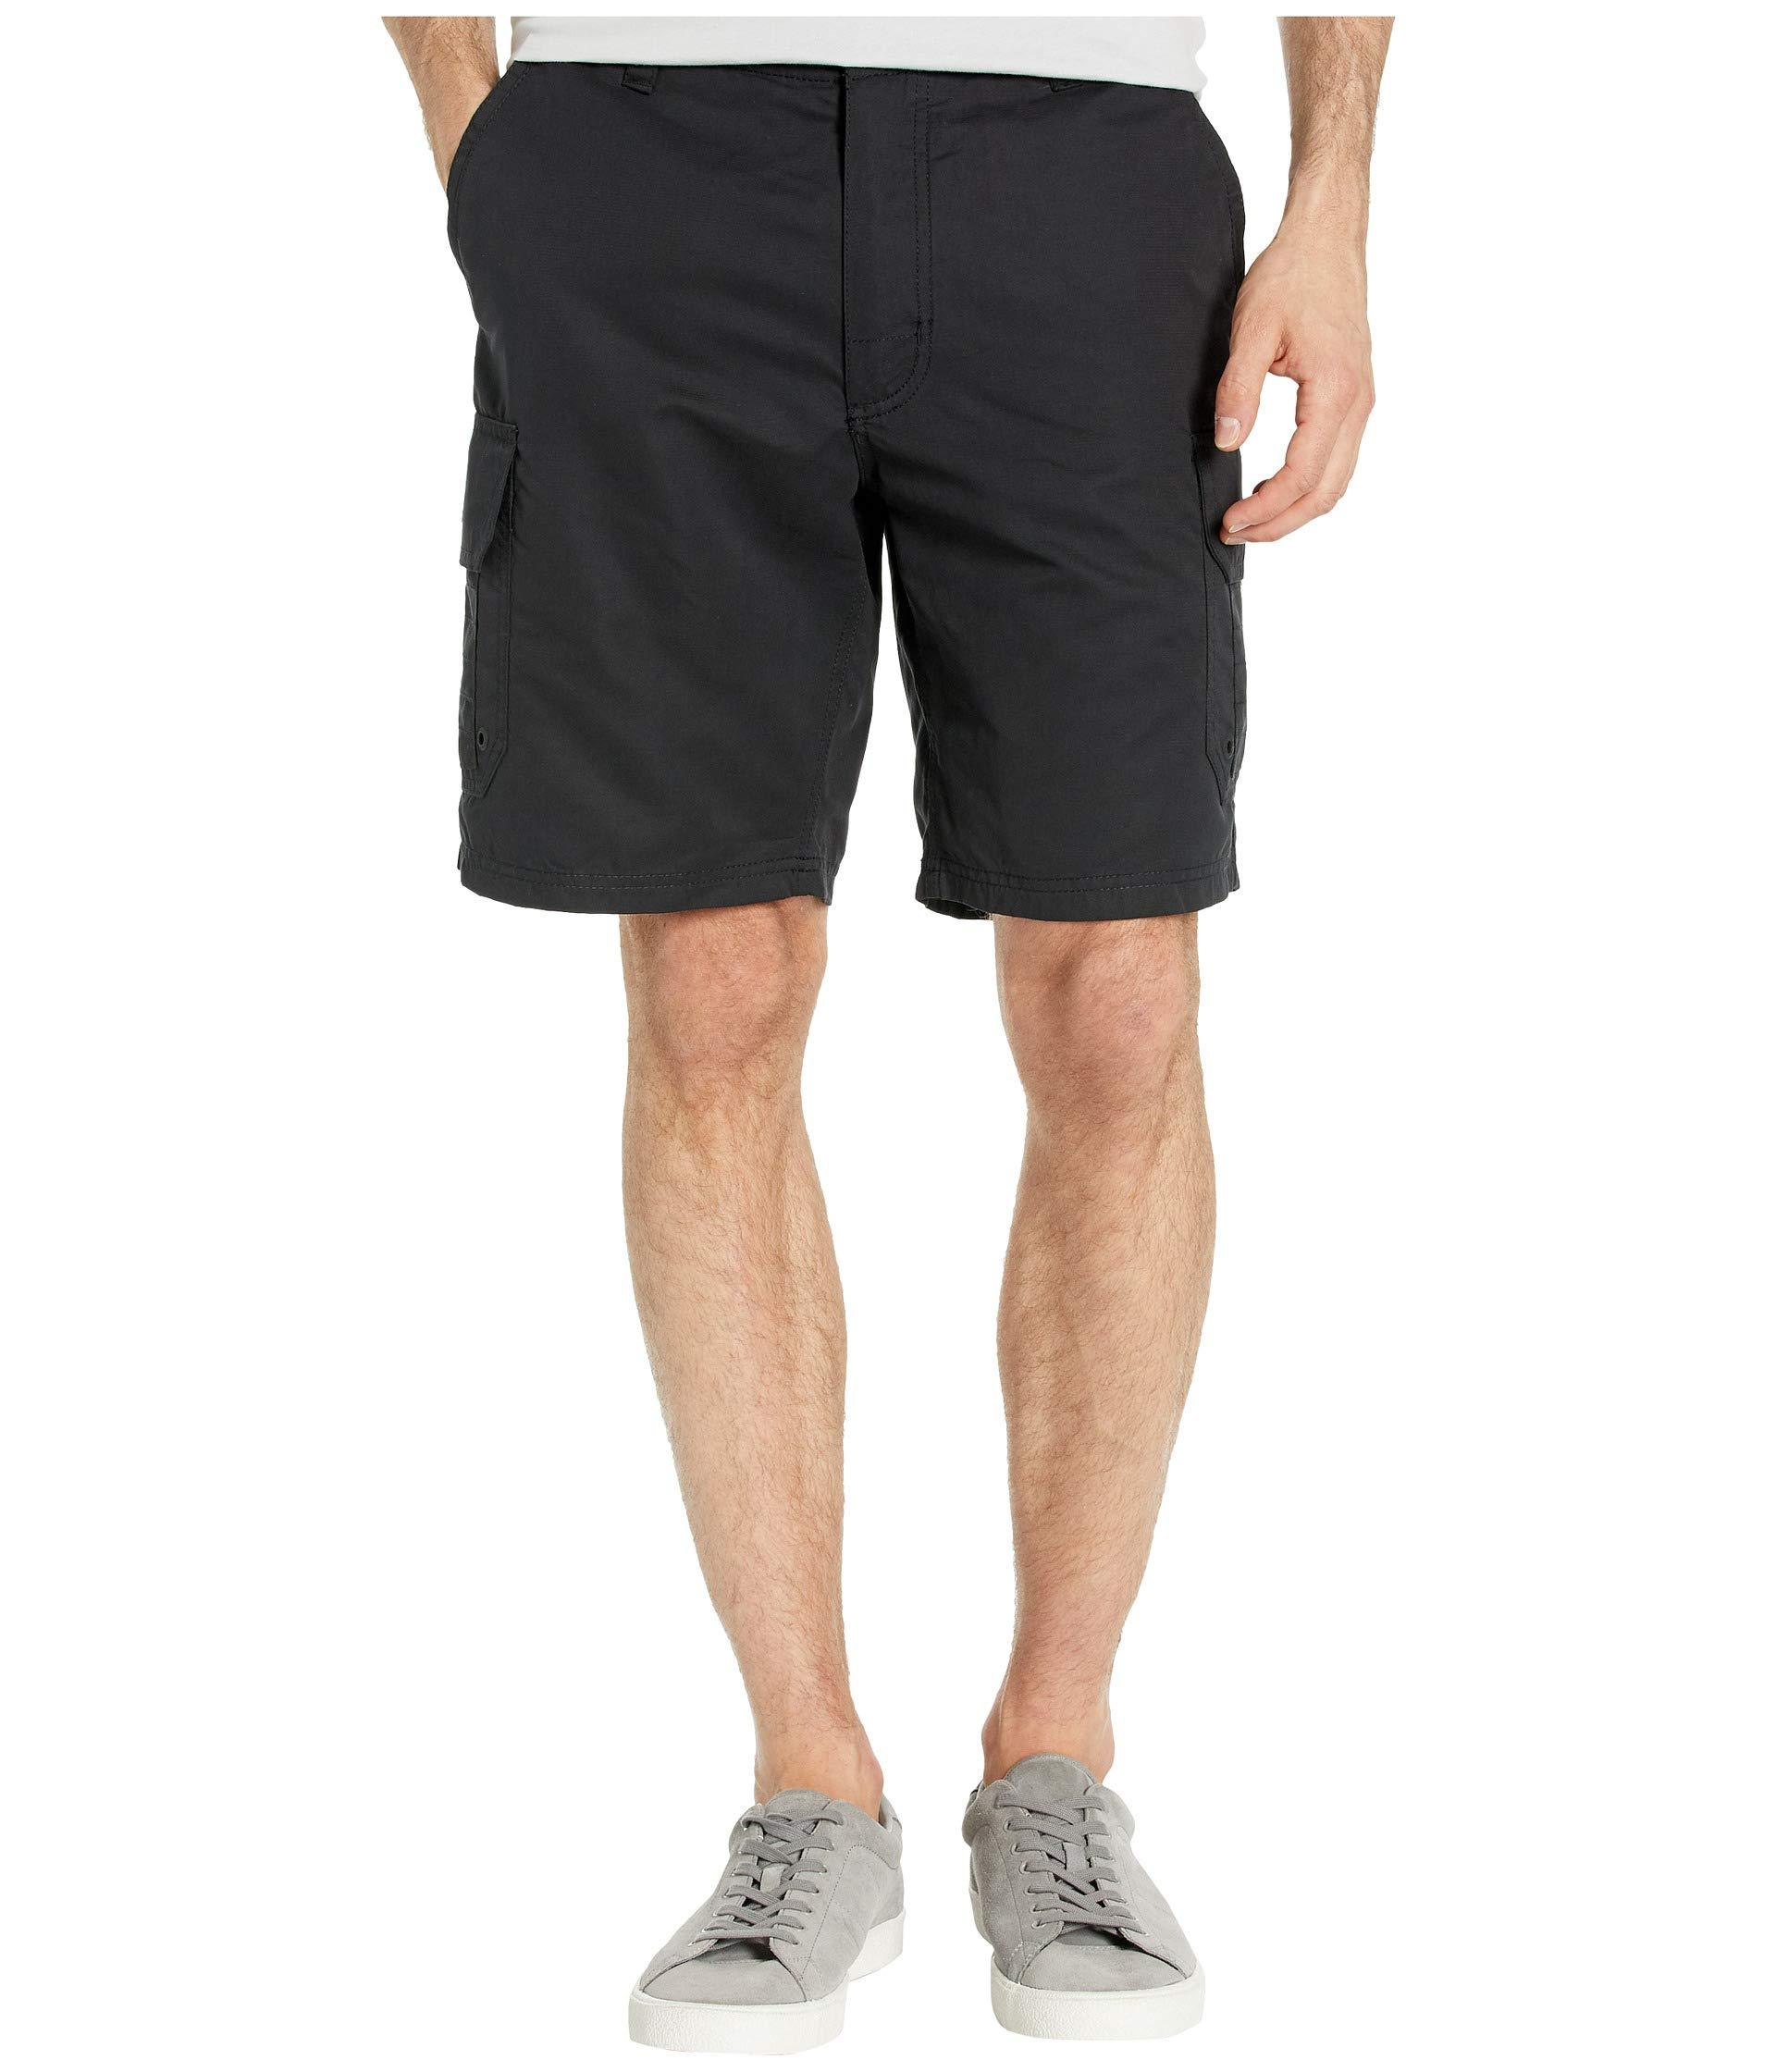 Quiksilver Synthetic Maldive 9 Cargo Shorts in Black for Men - Lyst